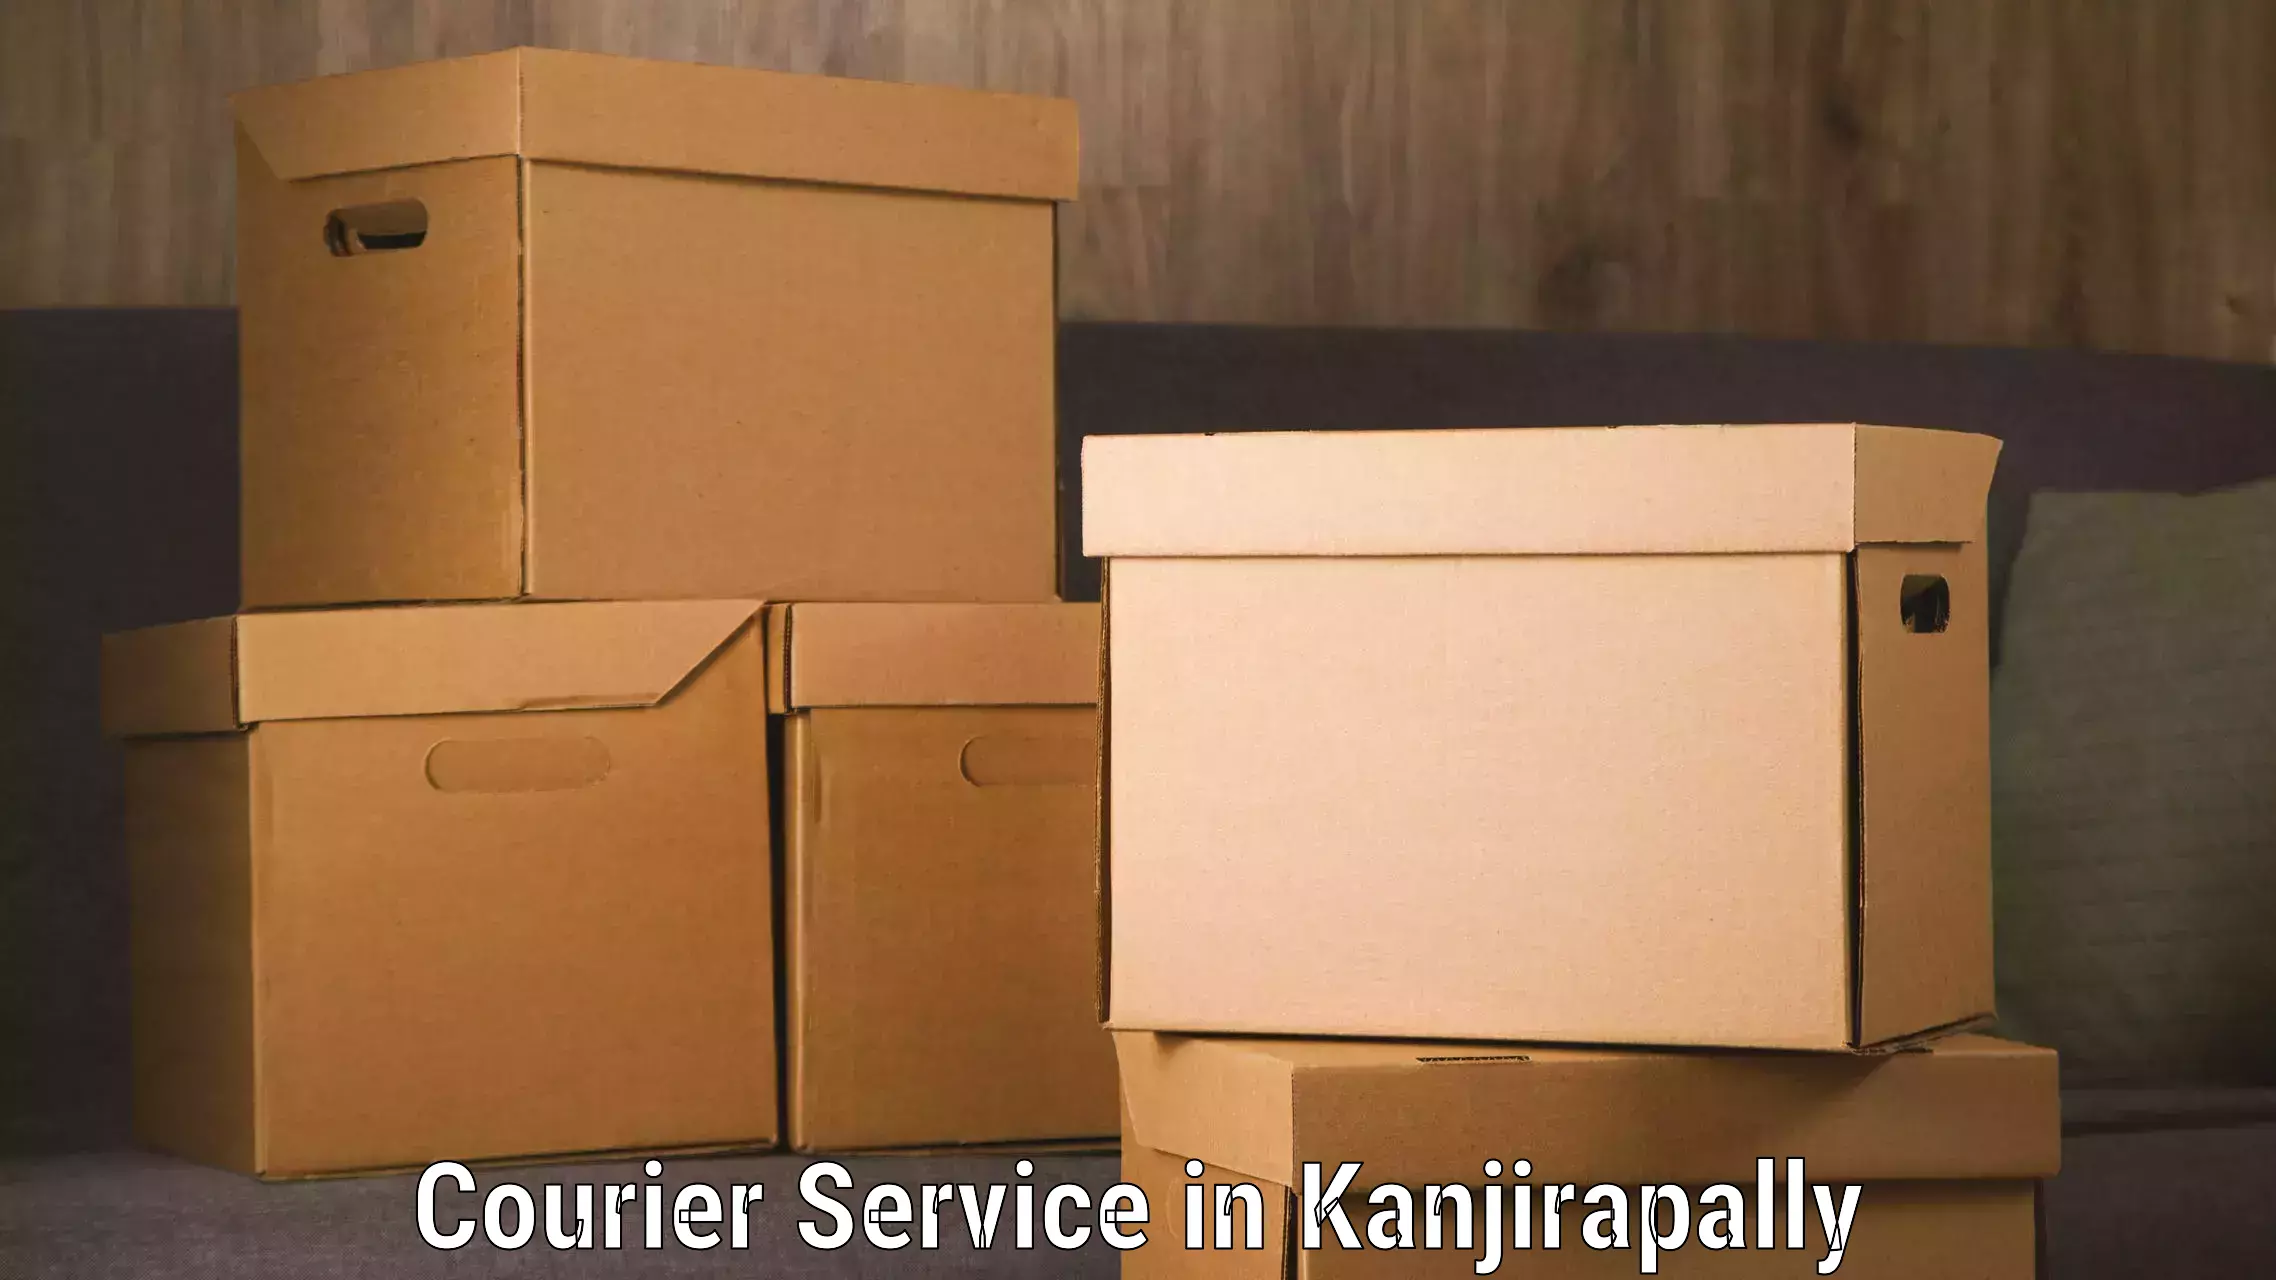 Full-service courier options in Kanjirapally